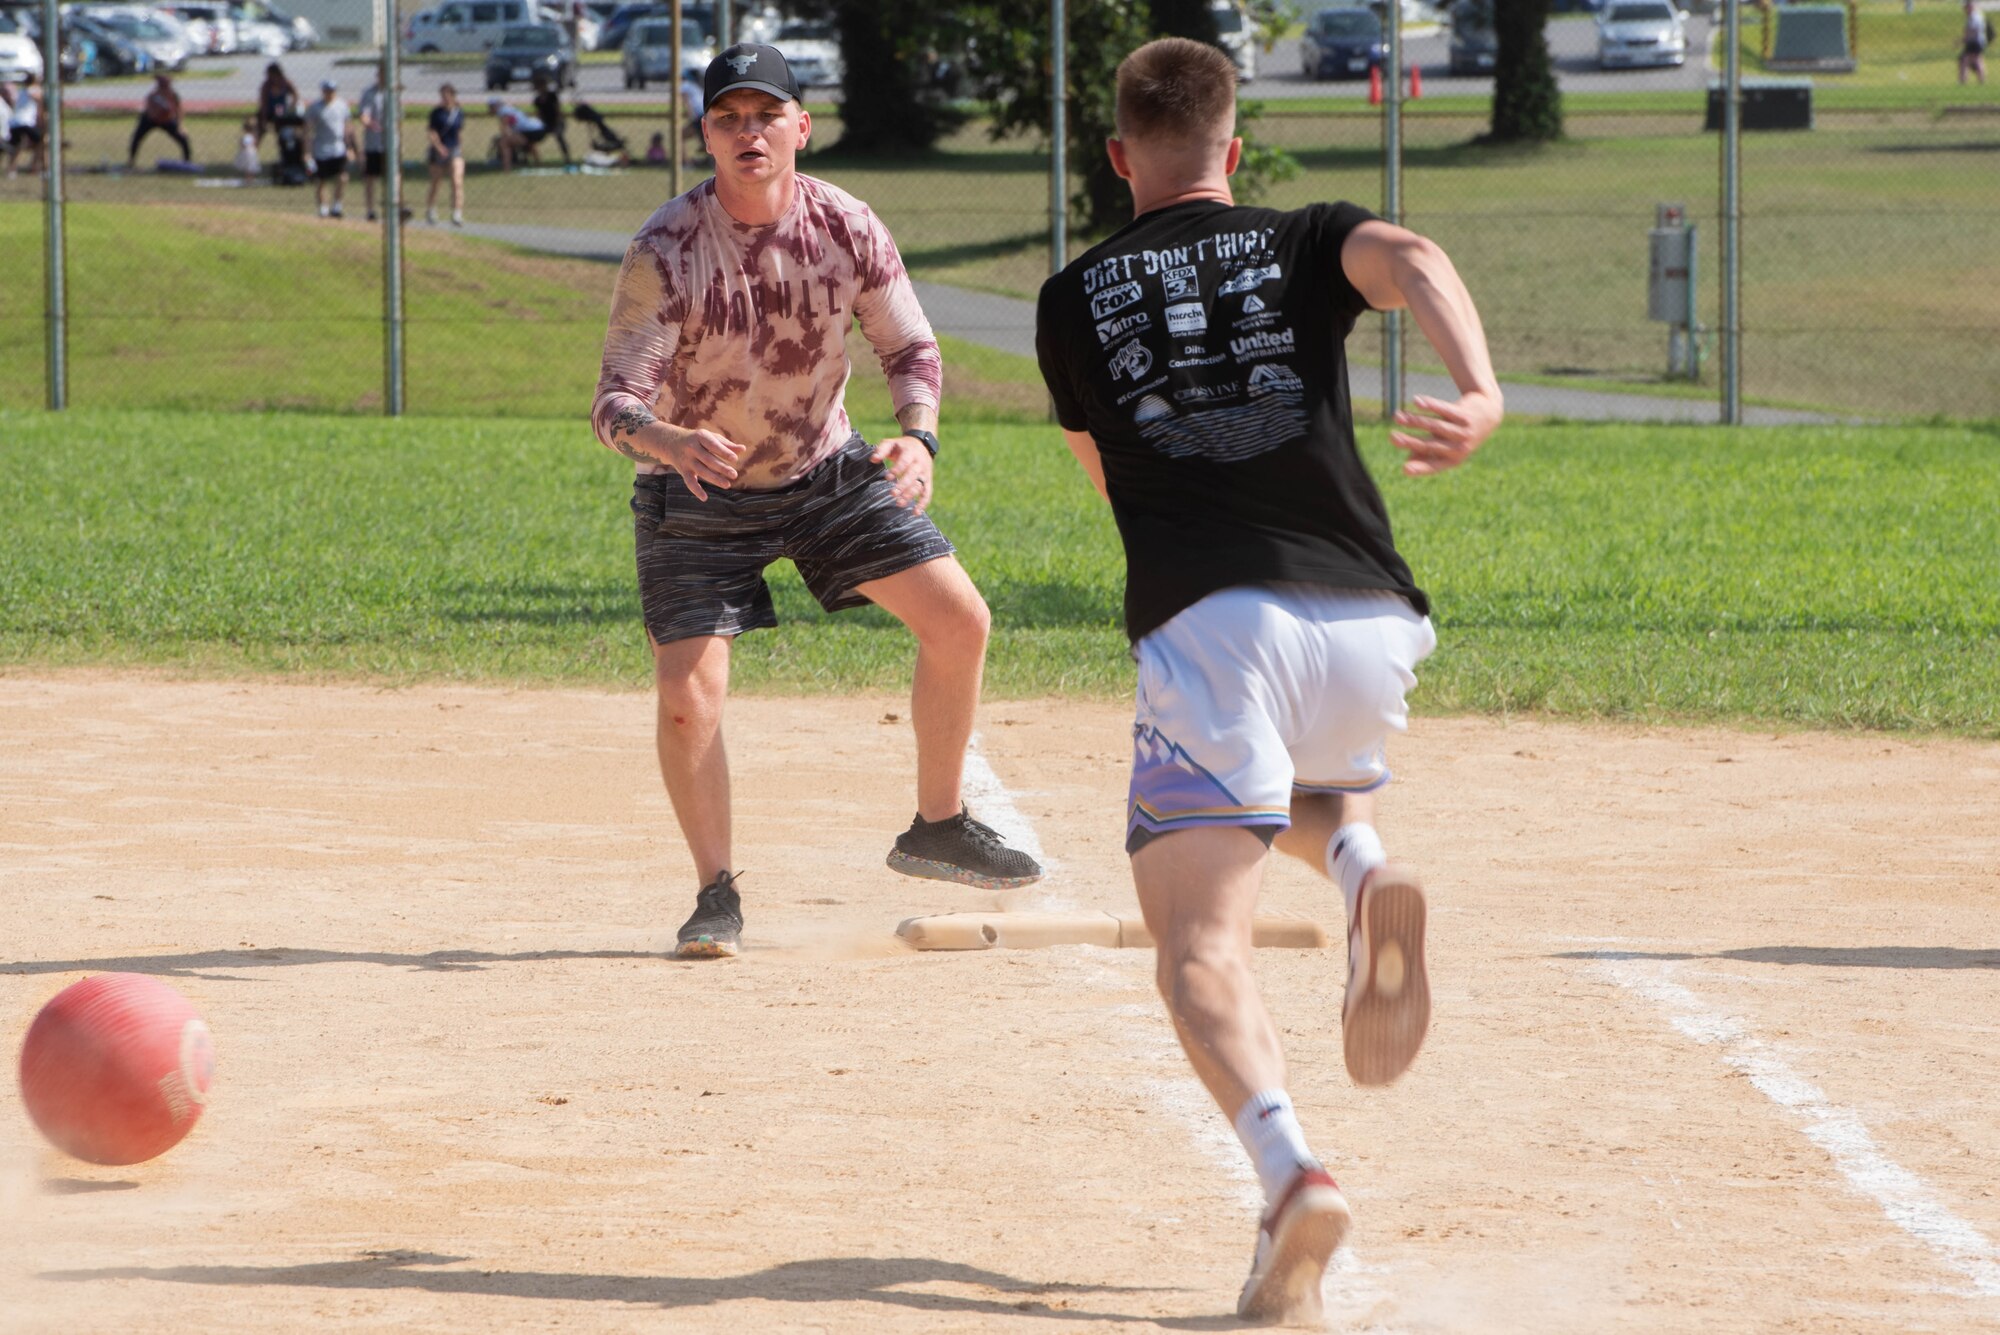 An Airman runs to first base in a game of kickball.